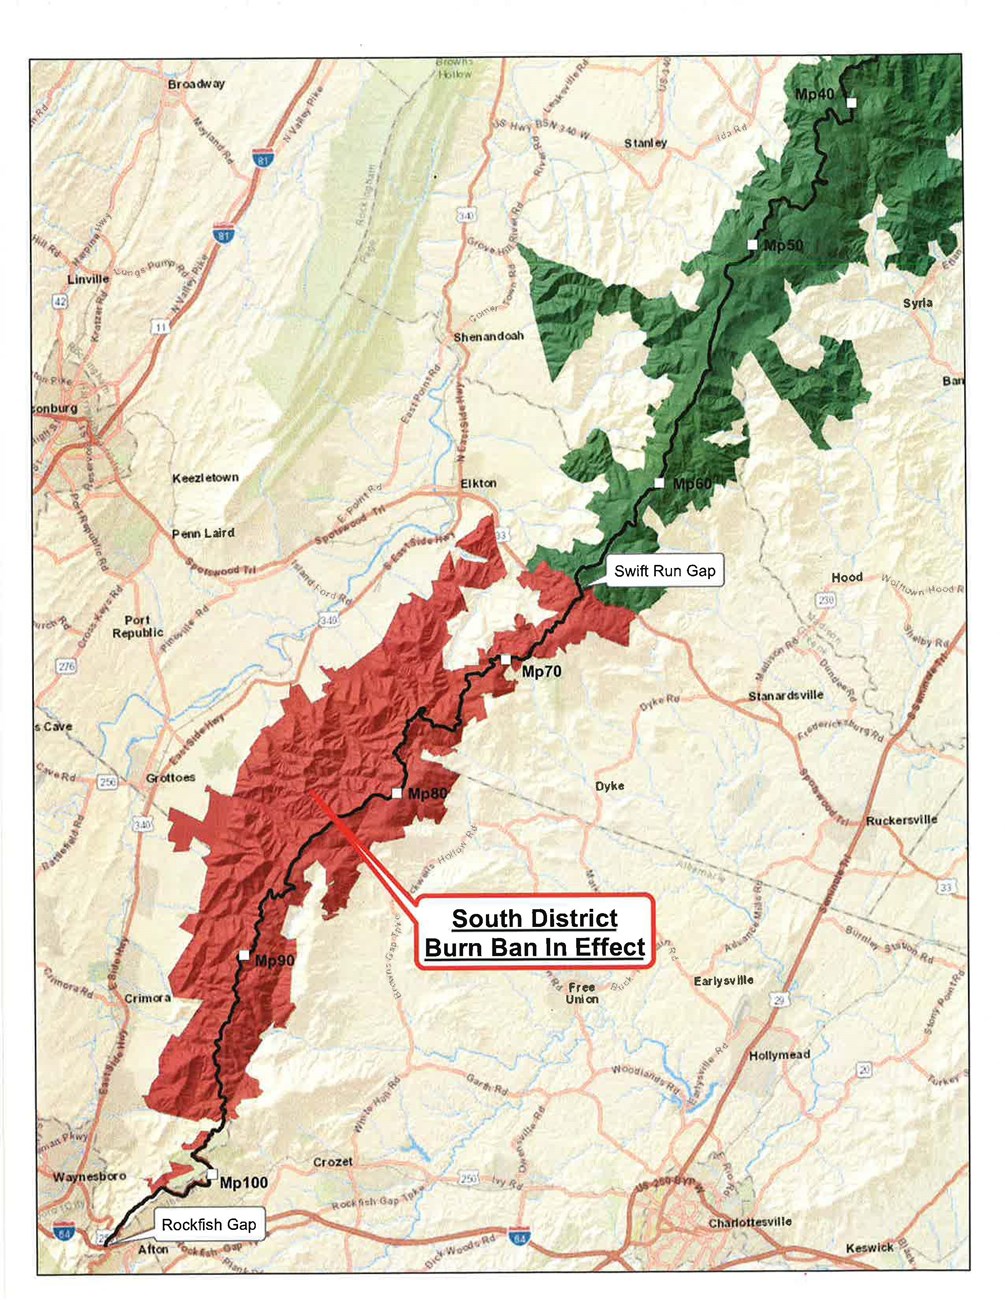 A map of the Shenandoah National Park shows the area that fires are currently banned in: the southern portion of the map, highlighted in red.